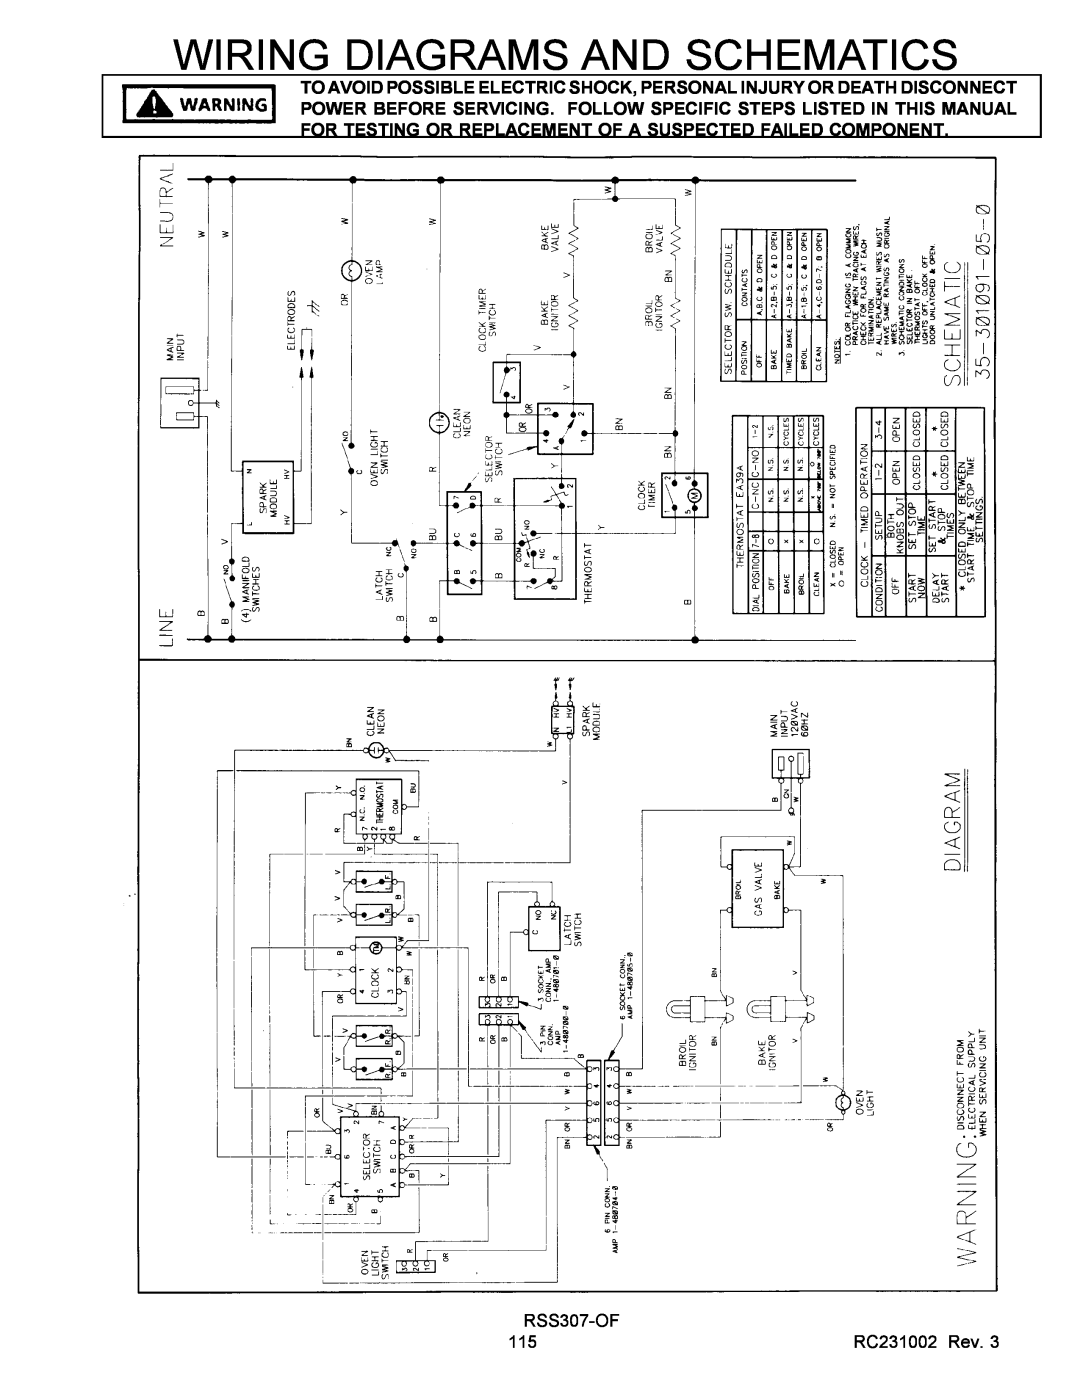 Amana RST service manual Wiring Diagrams And Schematics, RSS307-OF, RC231002 Rev 